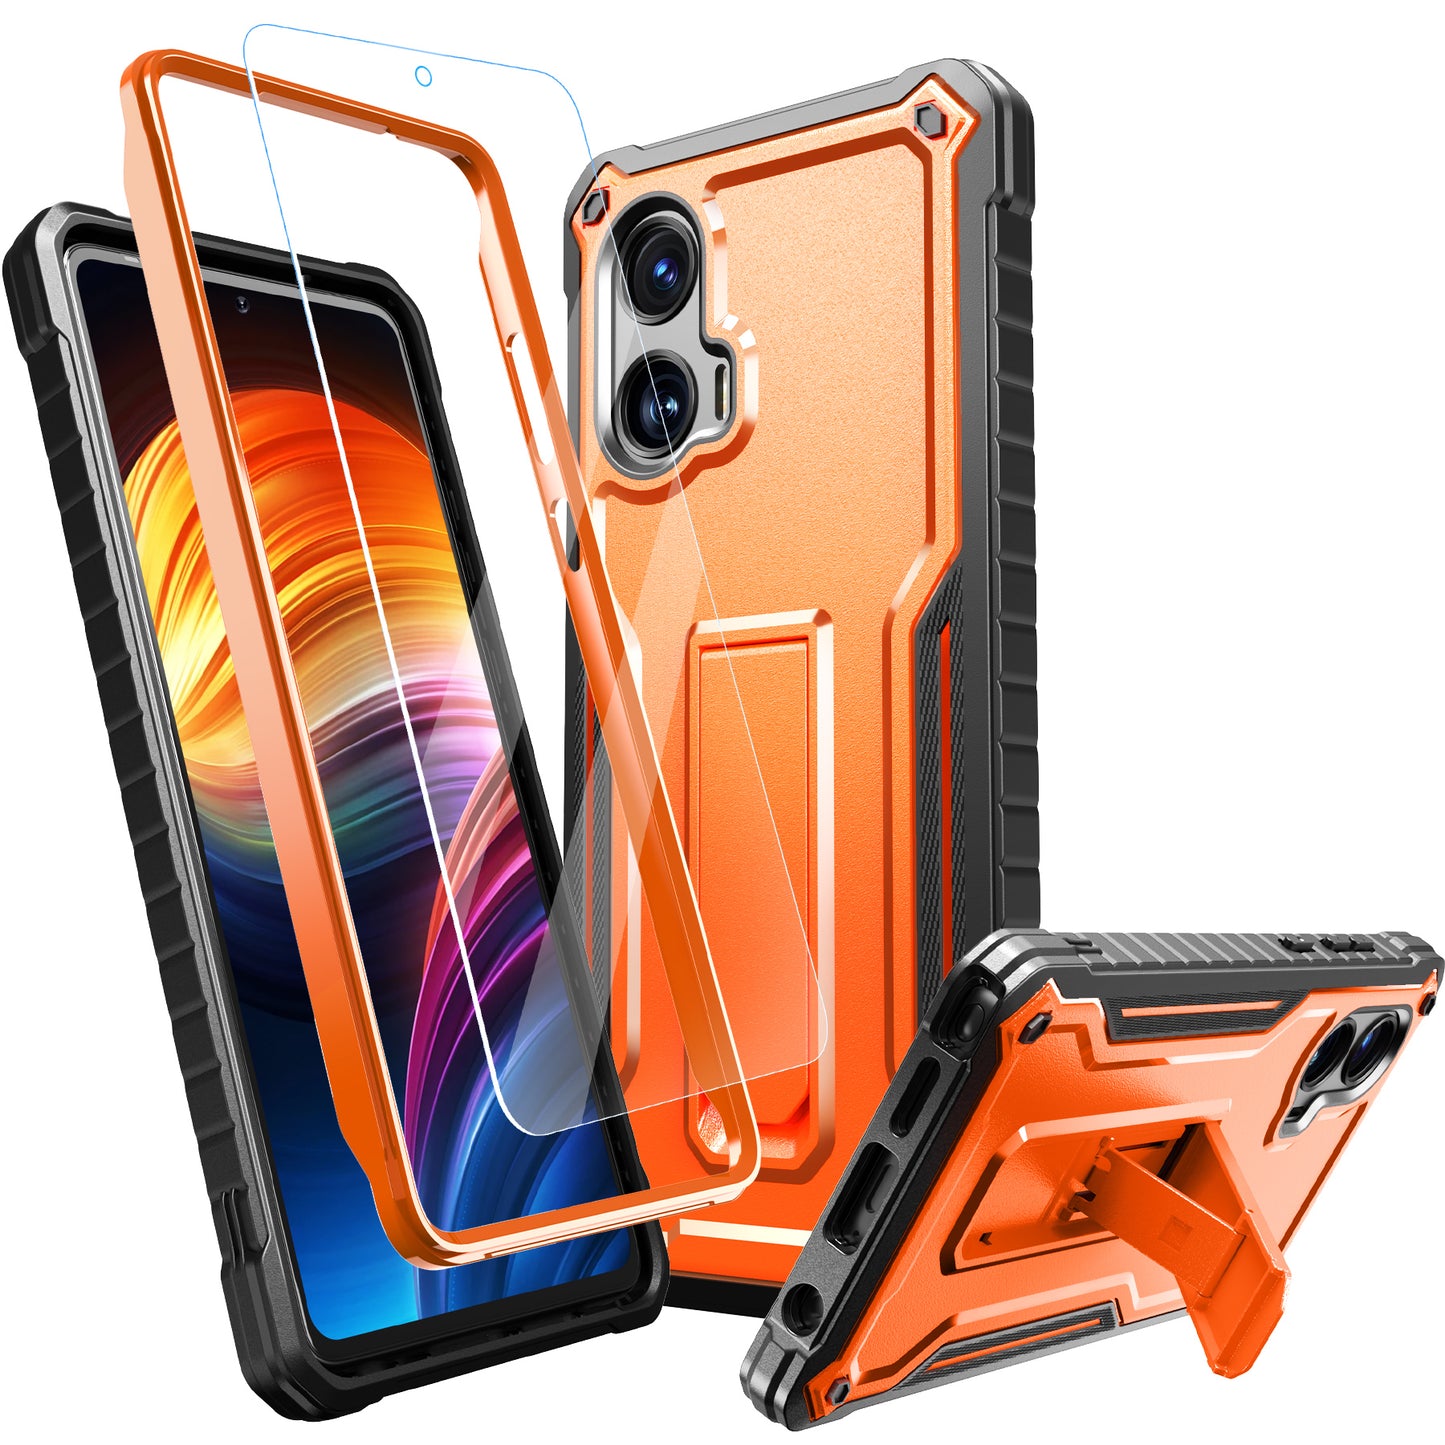 FITO for Moto G Stylus 5G 2024 Case with Screen Protector, Dual Layer Shockproof Heavy Duty Case for Moto G Stylus 5G 2024 Phone with Screen Protector, Built-in Kickstand